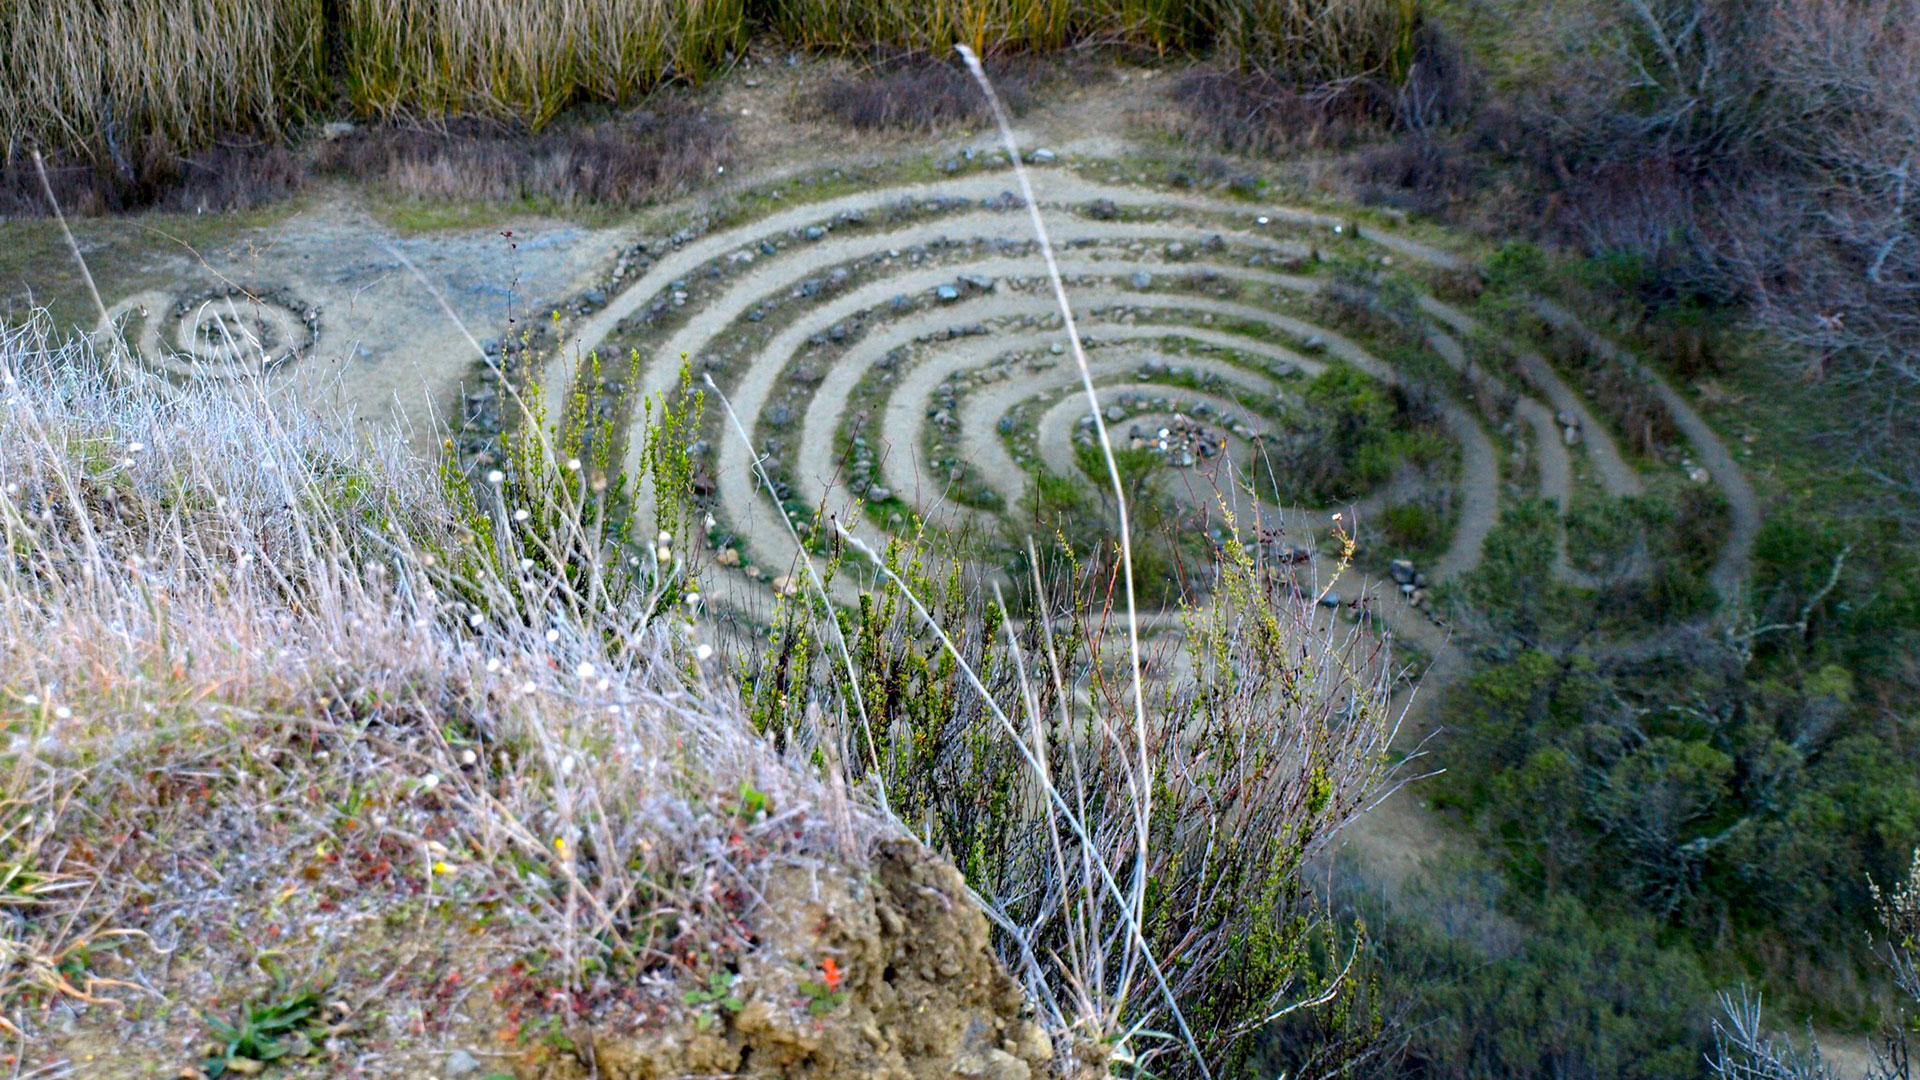 A labyrinth made of grass and stones sits at the bottom of a quarry in Sibley Volcanic Regional Preserve.